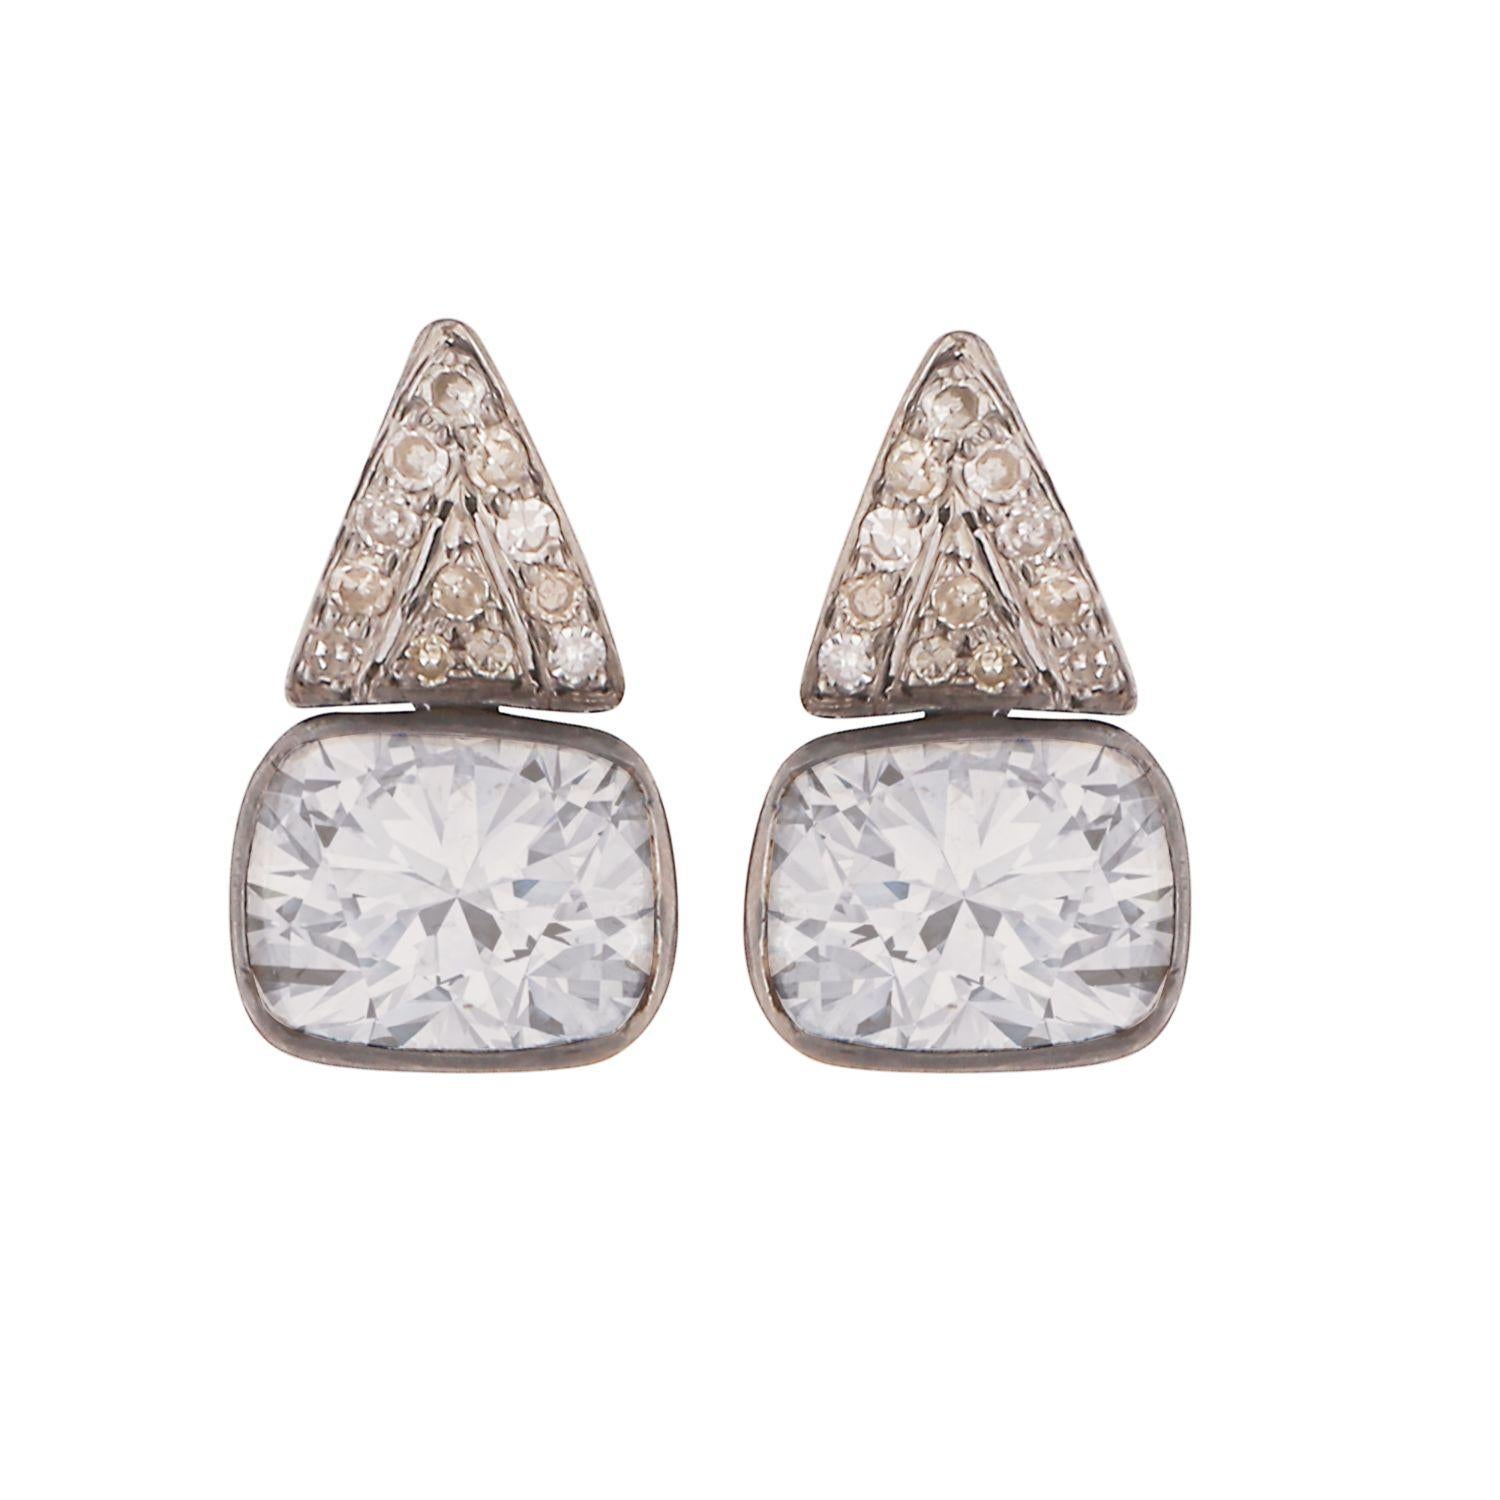 A very unusual pair of earrings, perfect as a special gift and to wear everyday.

The top part is set with single diamonds, and the bottom are natural sliced diamonds.

Mix of 14kt gold and silver.

1.53 grams of 14kt gold; 2.07 grams silver

1.18